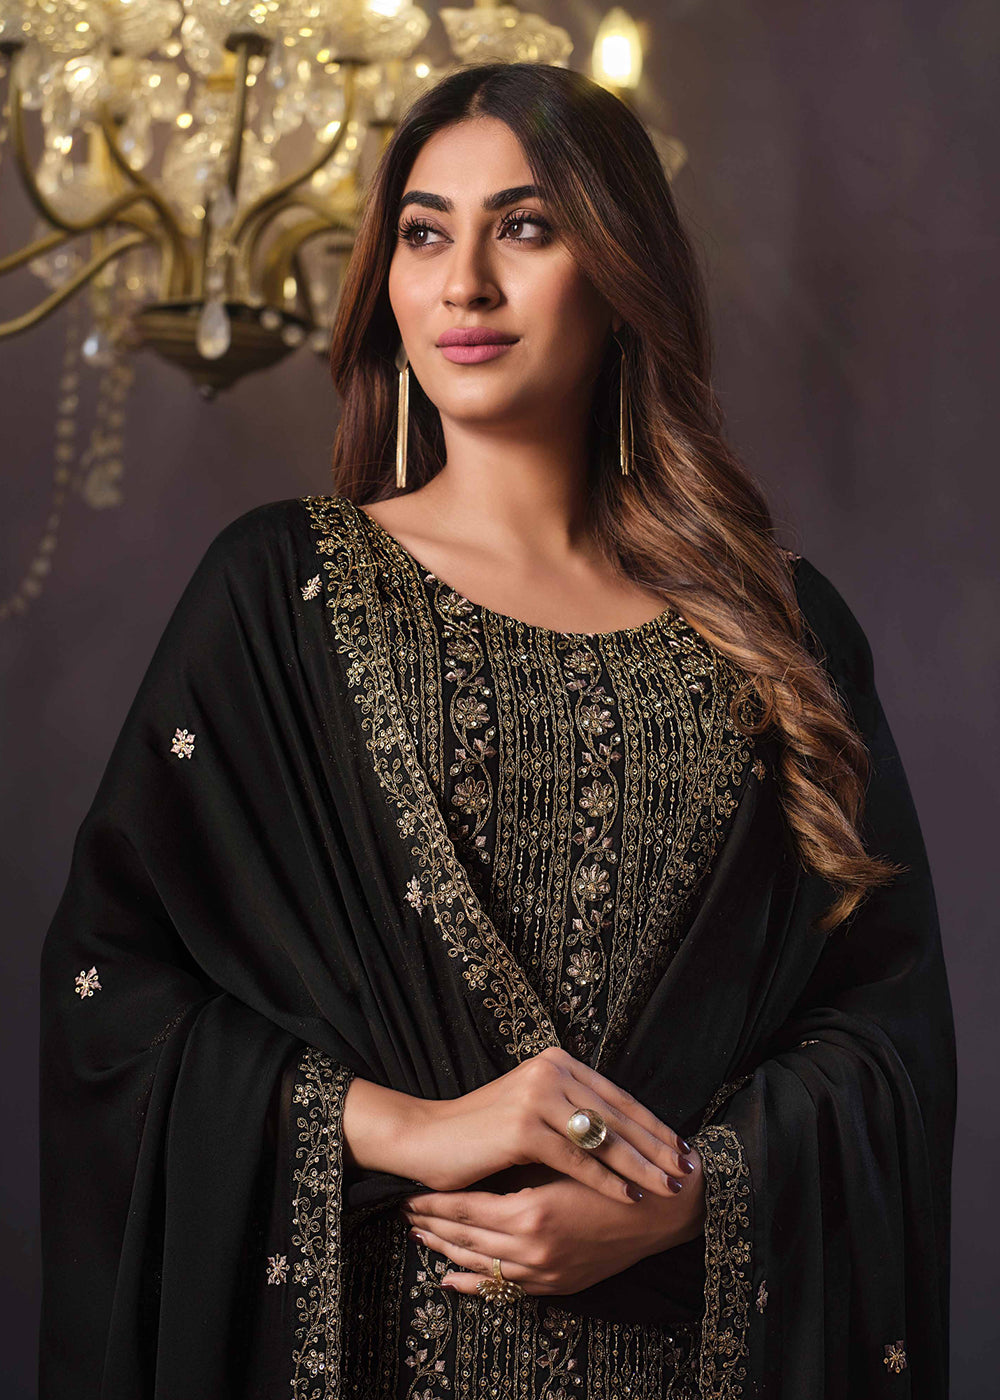 Buy Now Two Tone Cottonic Georgette Black Function Style Salwar Suit Online in USA, UK, Canada, Germany, Australia & Worldwide at Empress Clothing. 